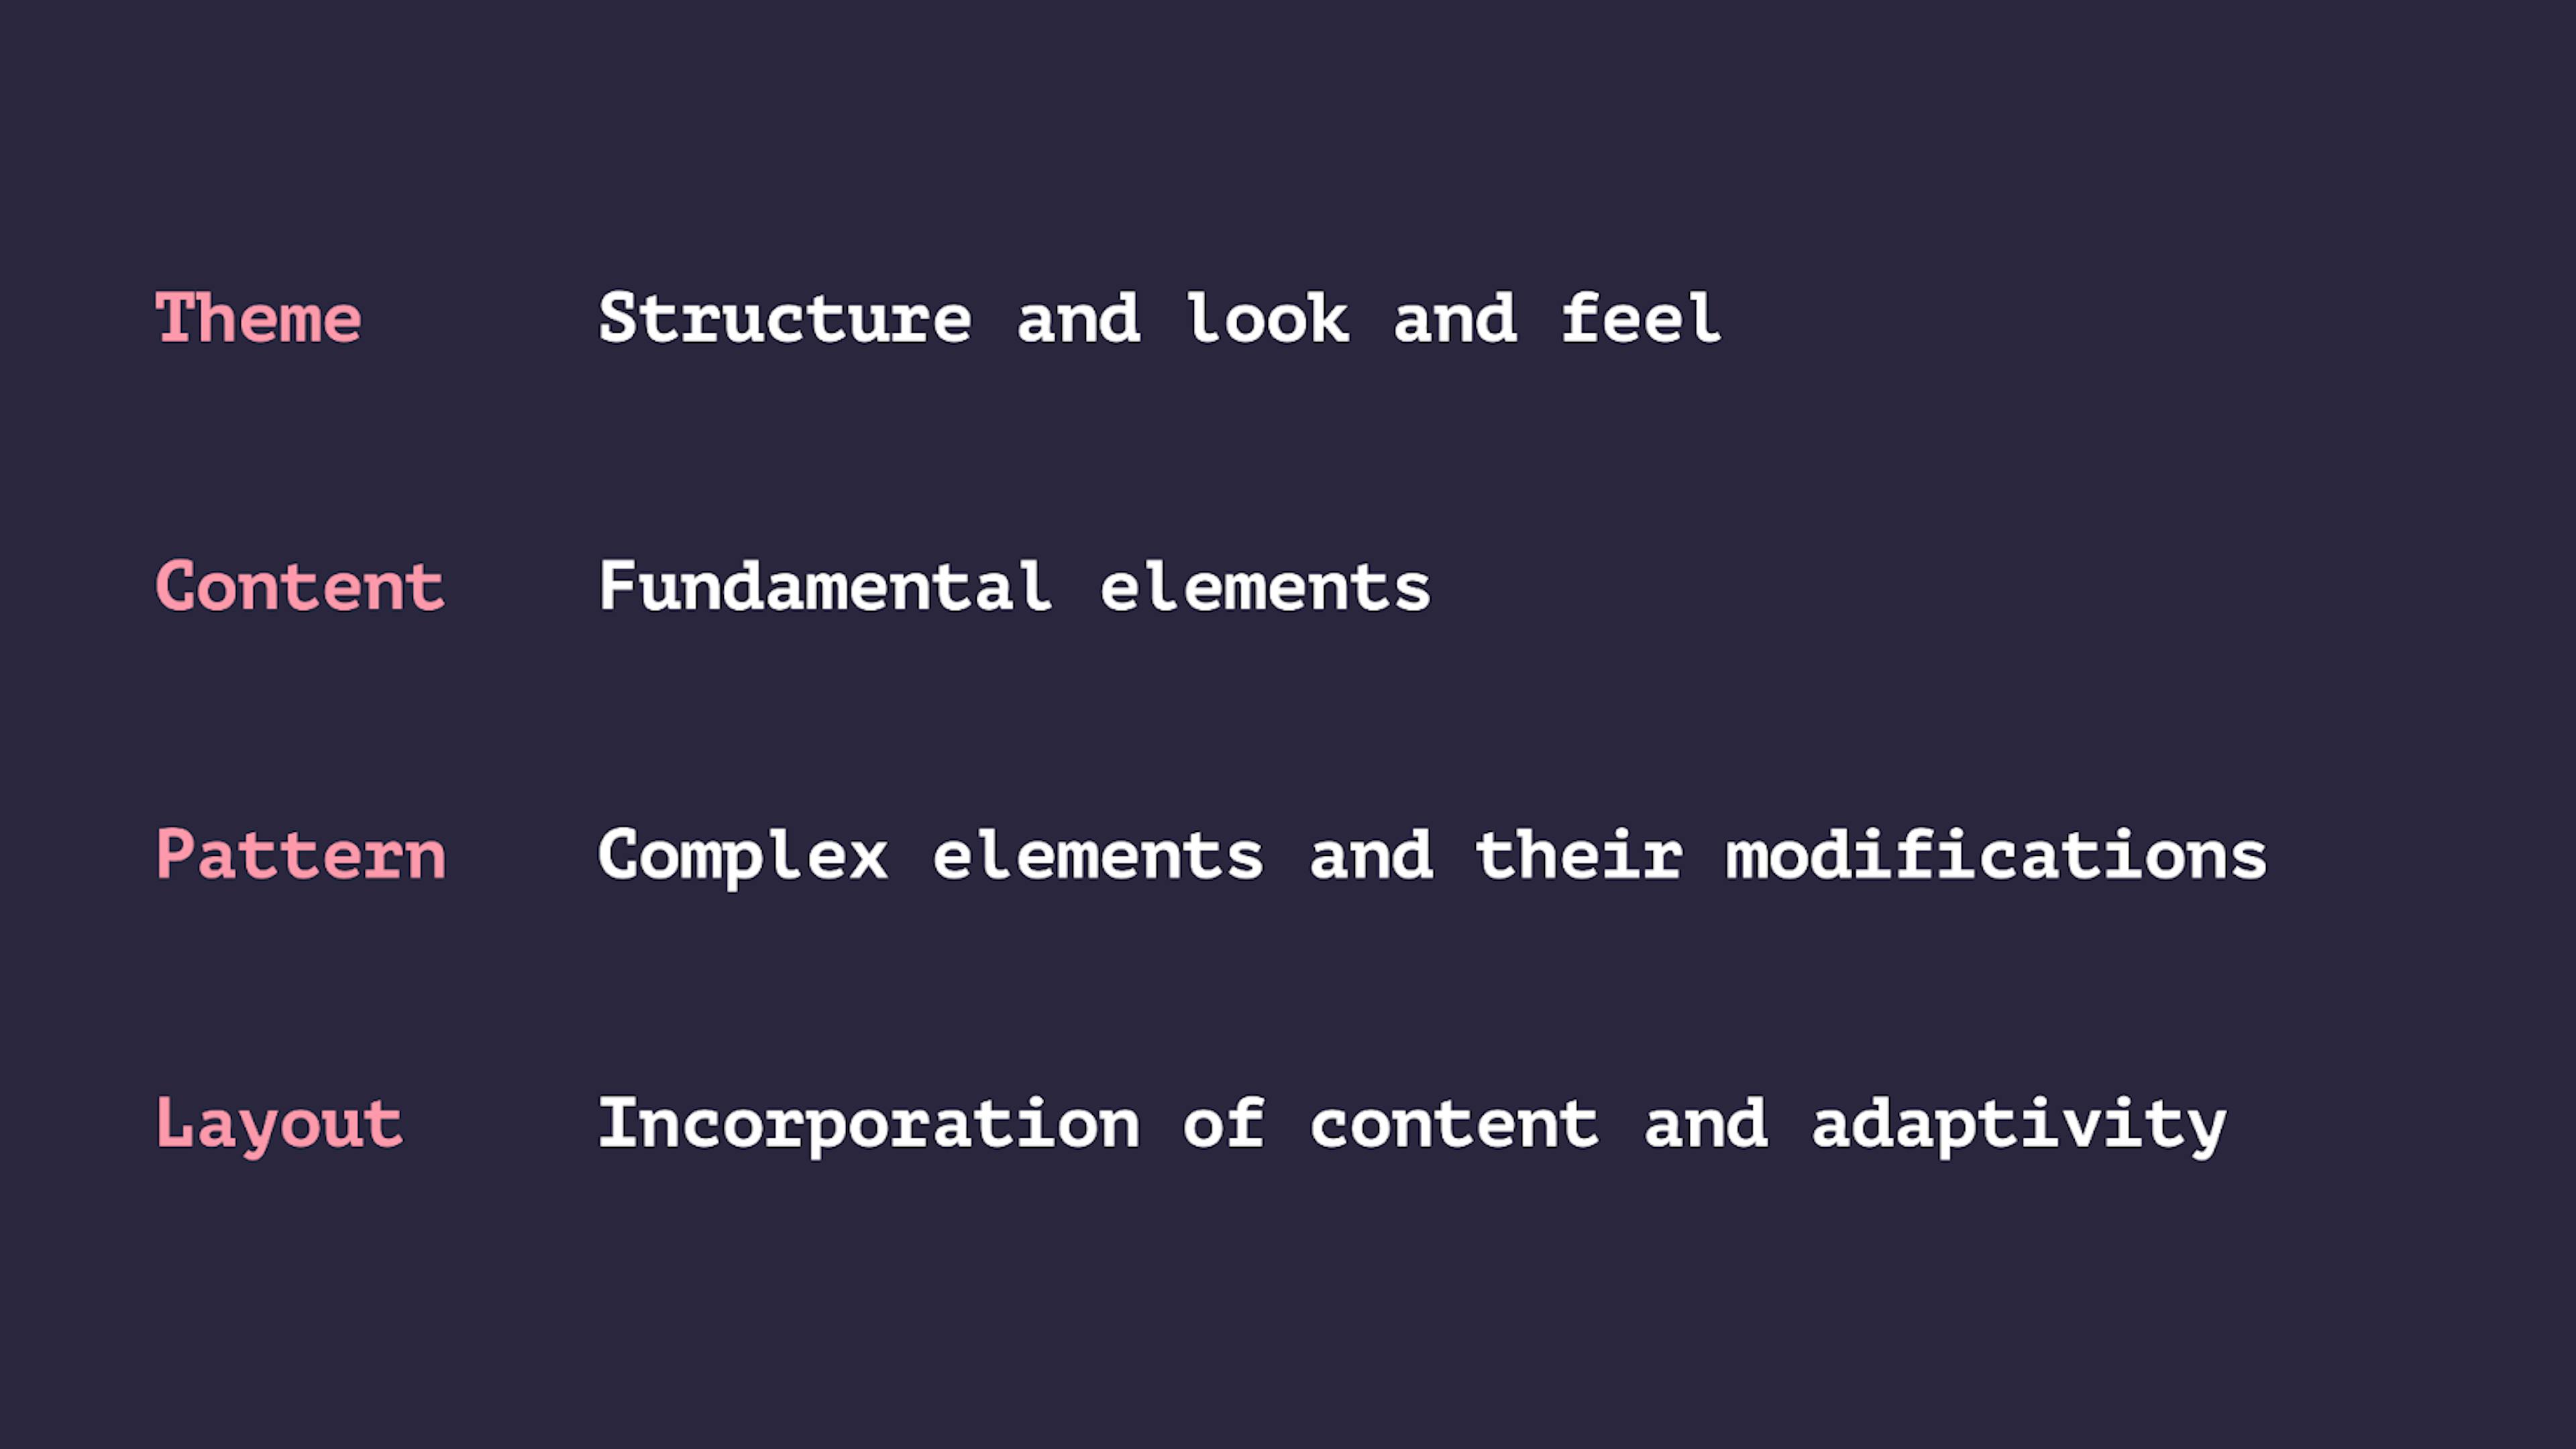 4 levels of the design system in a few words